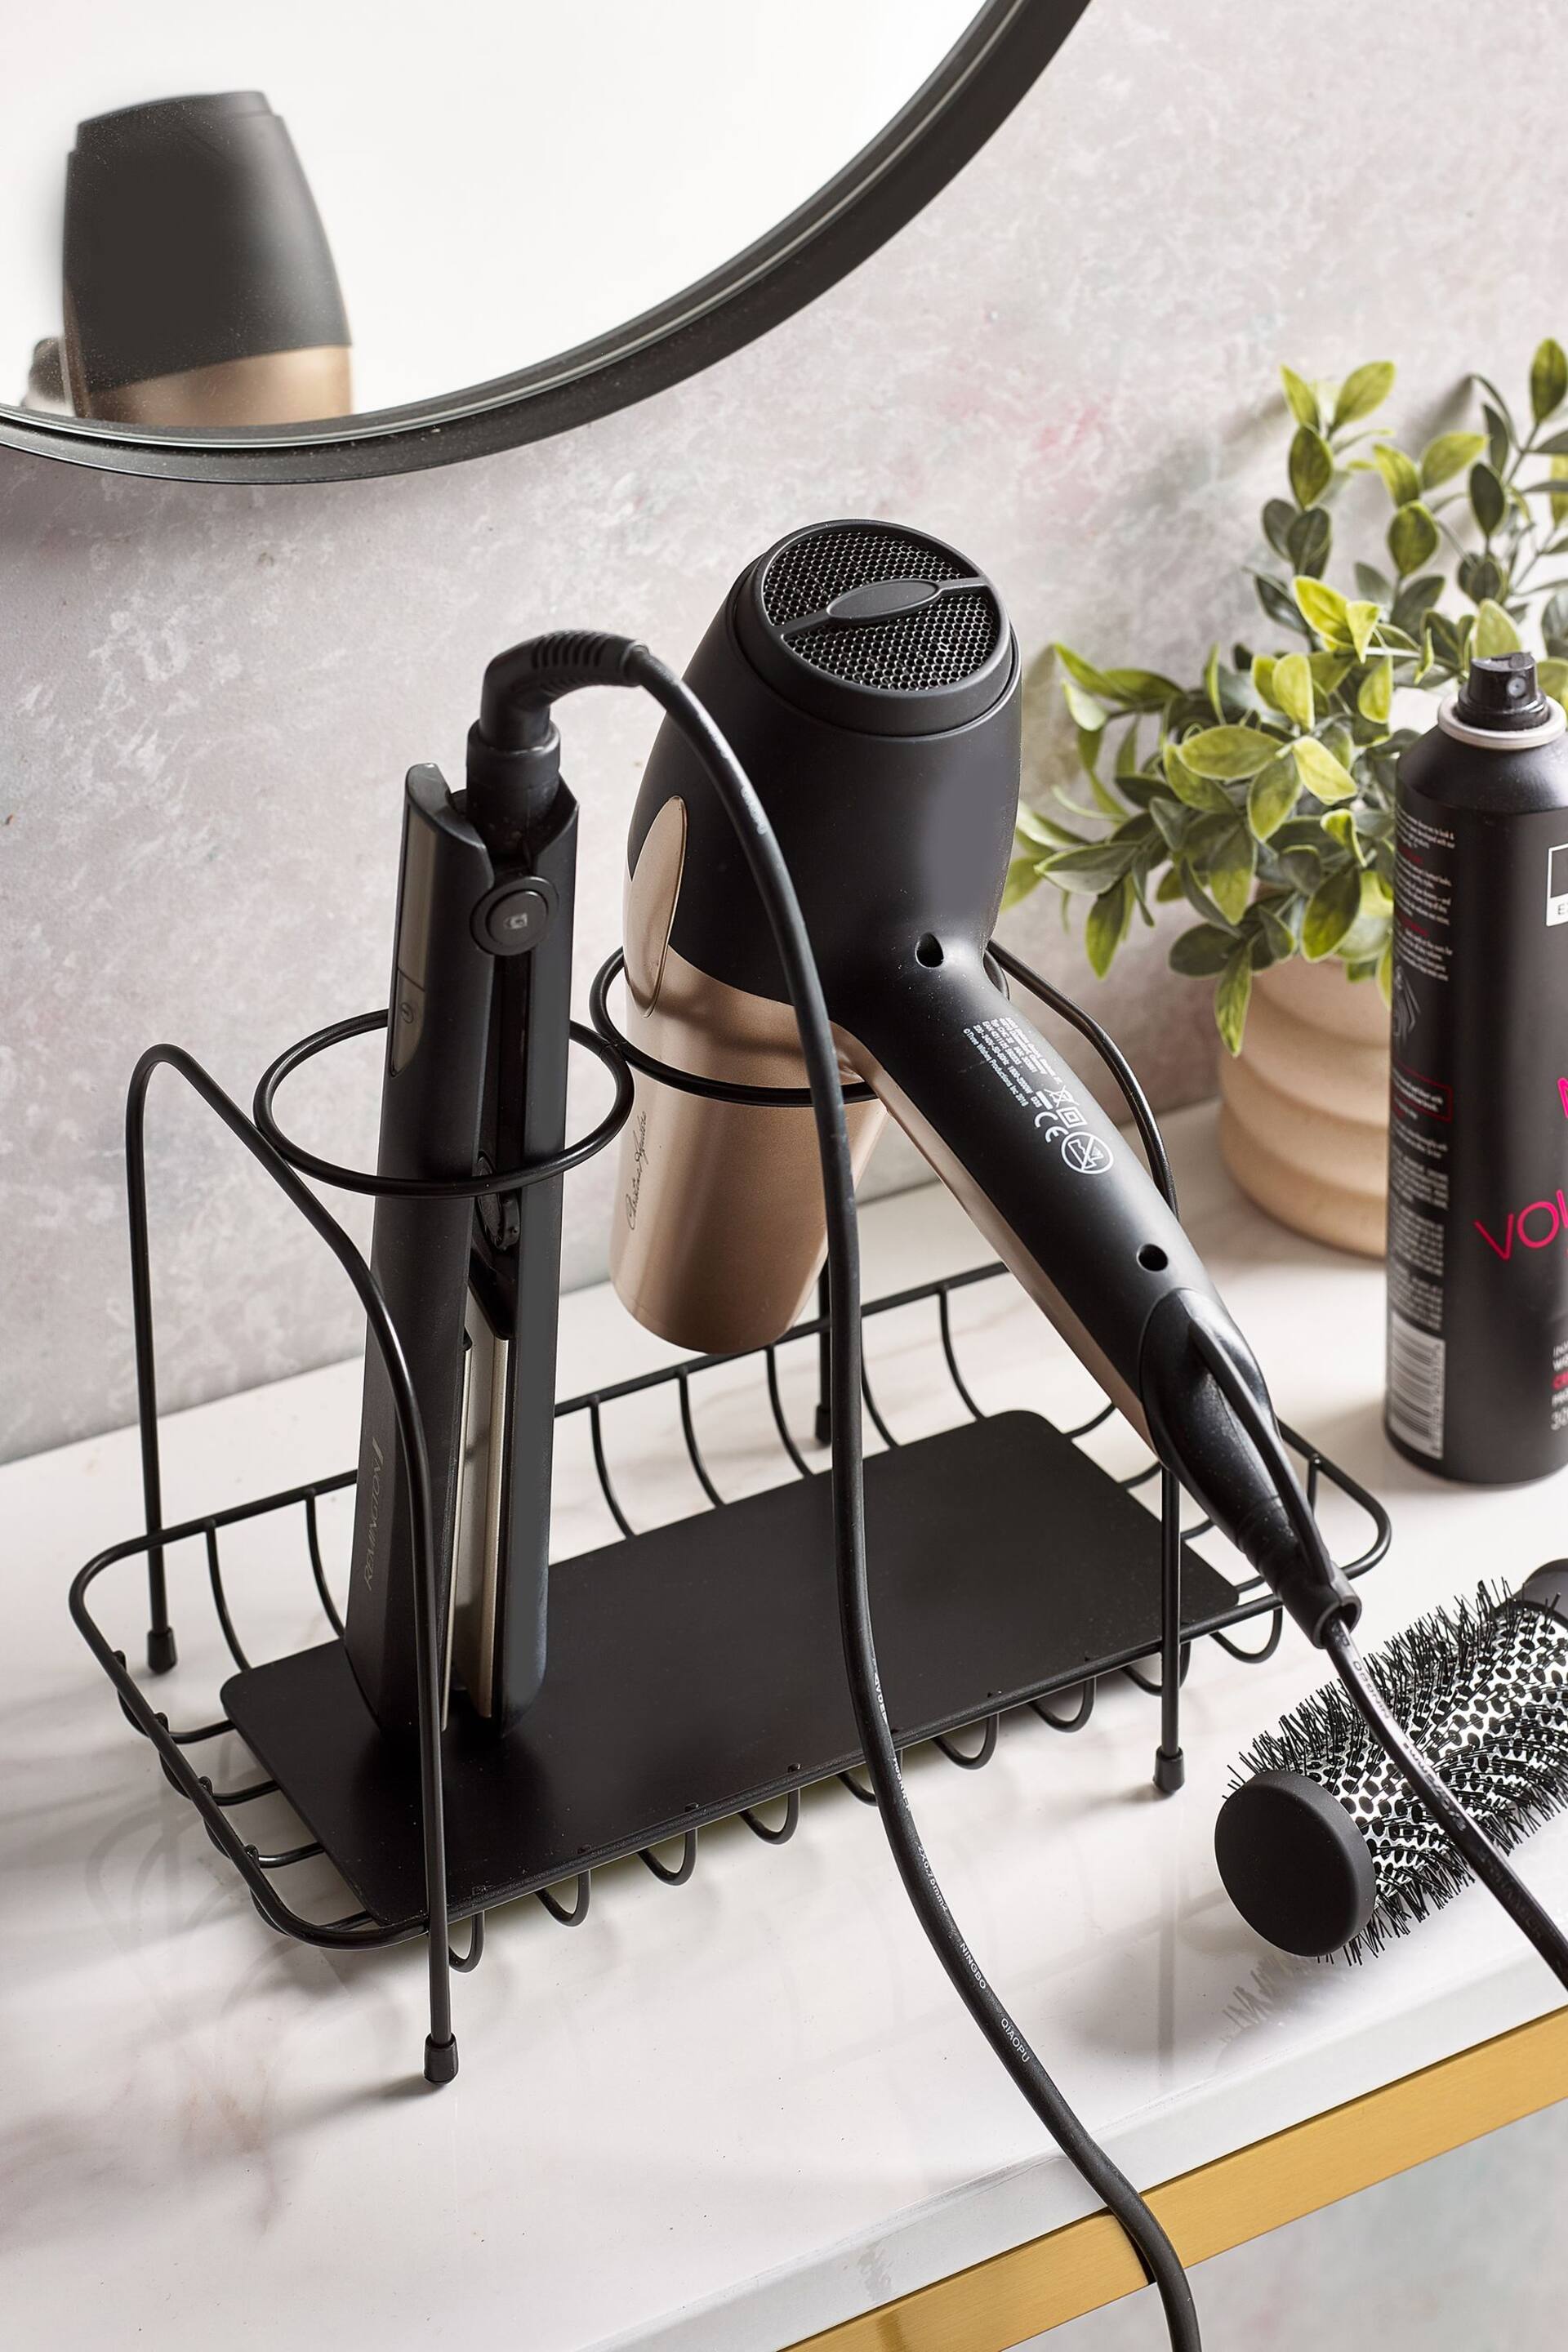 Black Hairdryer and Straighteners Holder - Image 1 of 3